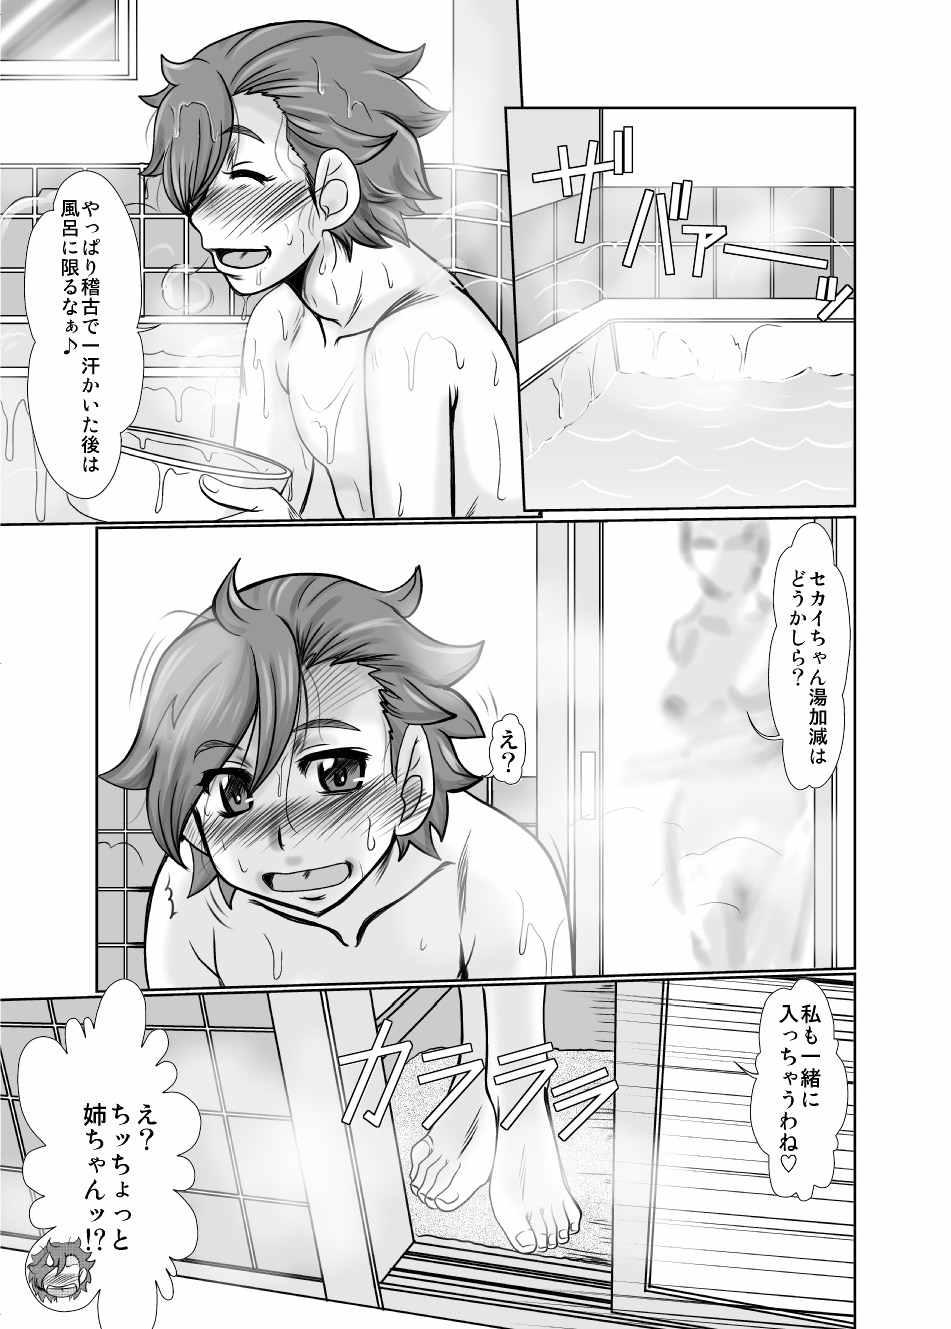 Eating Pussy F-83 - Gundam build fighters try Amateur Asian - Page 9